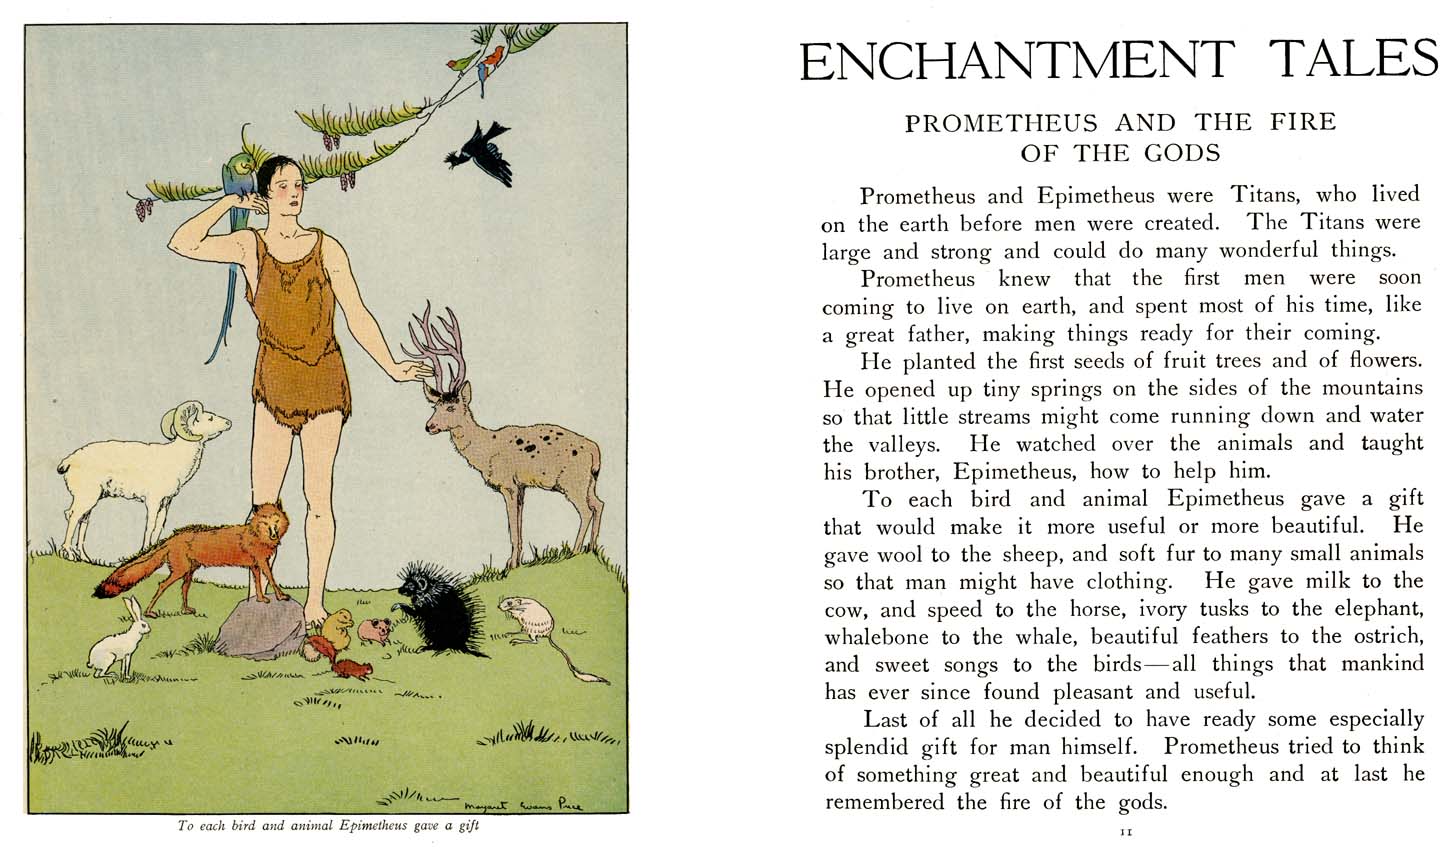 07_Enchantment_Tales_for_Children